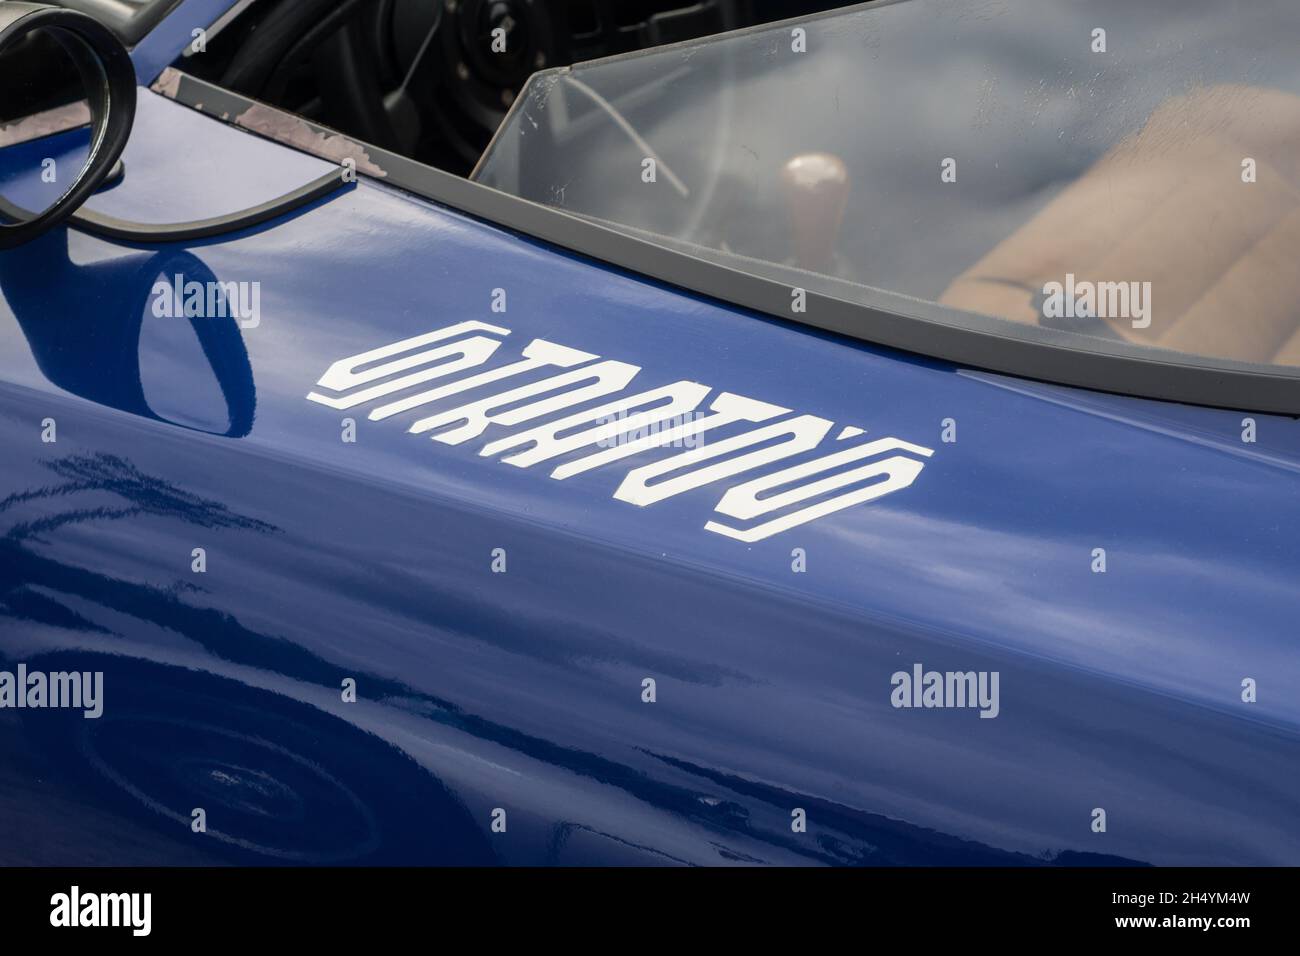 Close up detail of the logo name on the door of a blue Lancia Stratos HF Stradale classic Italian sports rally car. Stock Photo